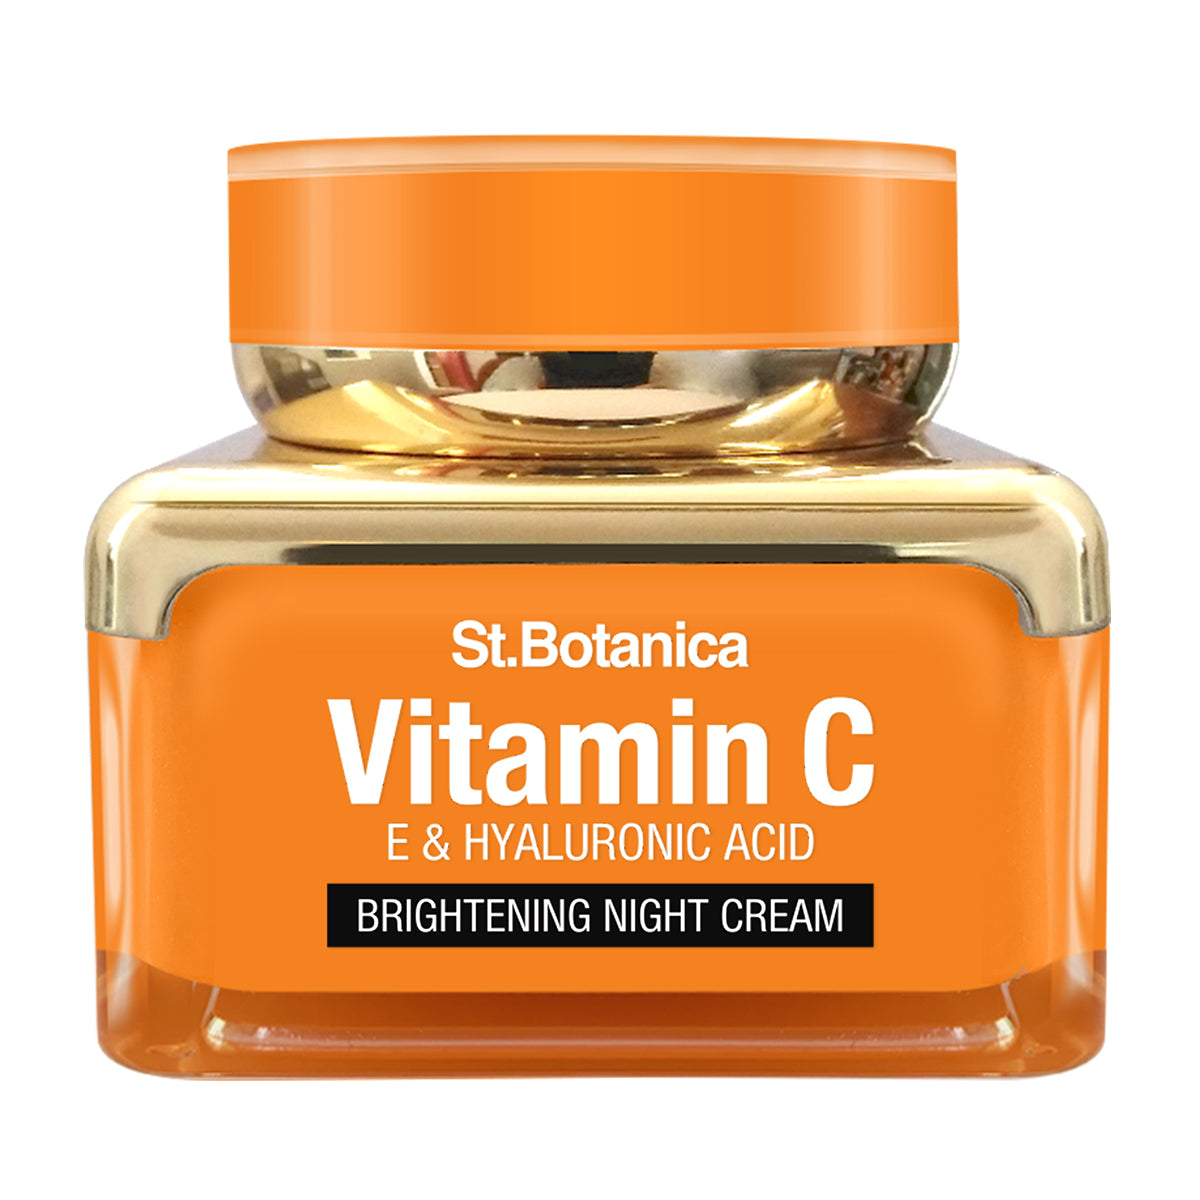 St.Botanica Vitamin C, E & Hyaluronic Acid Brightening Night Cream (With Science + Botanical Actives), 50g (STBOT537)